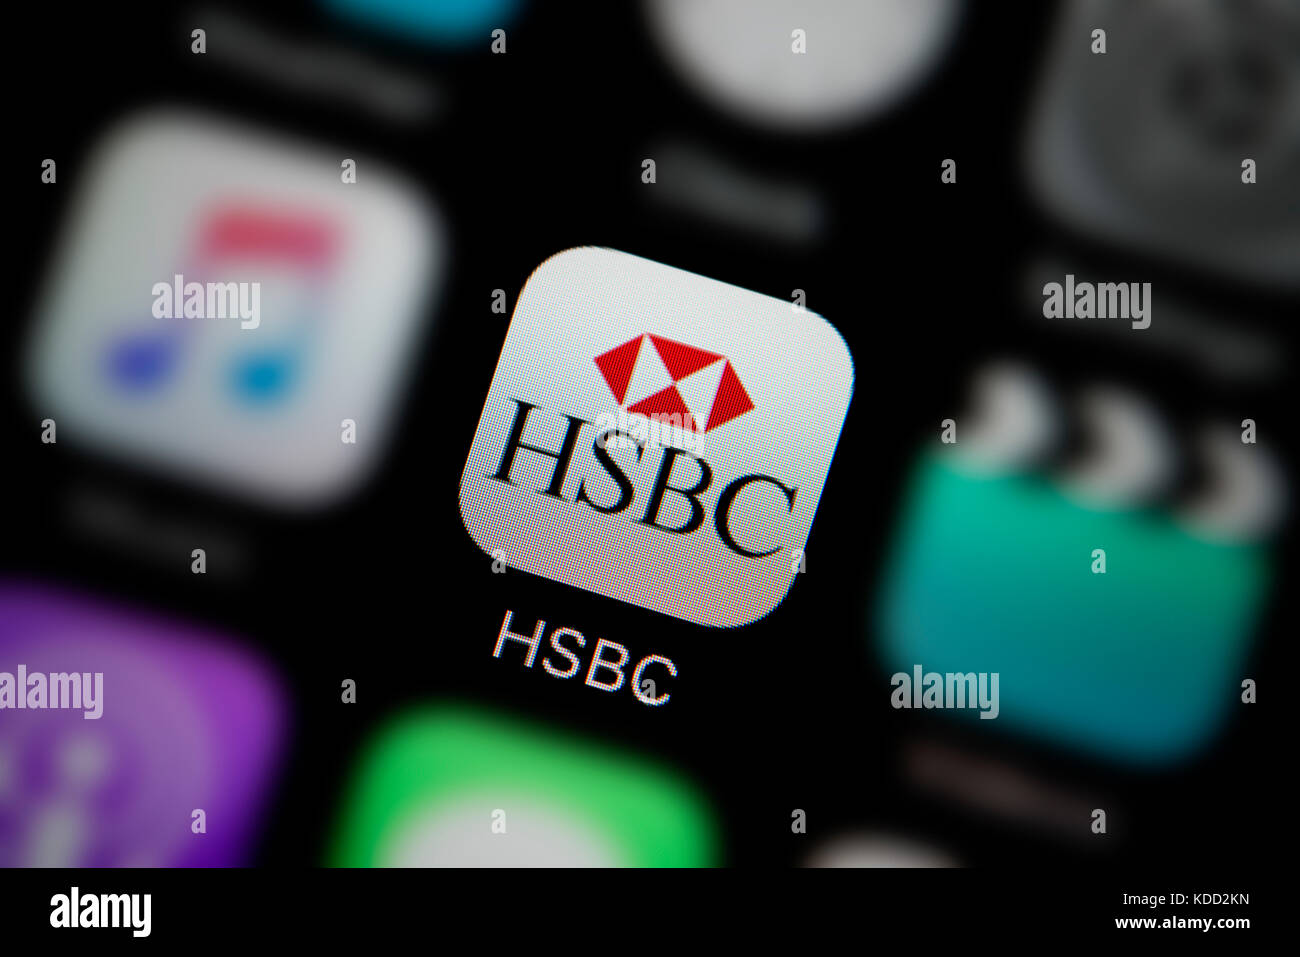 A close-up shot of the logo representing HSBC Bank app icon, as seen on the screen of a smart phone (Editorial use only) Stock Photo